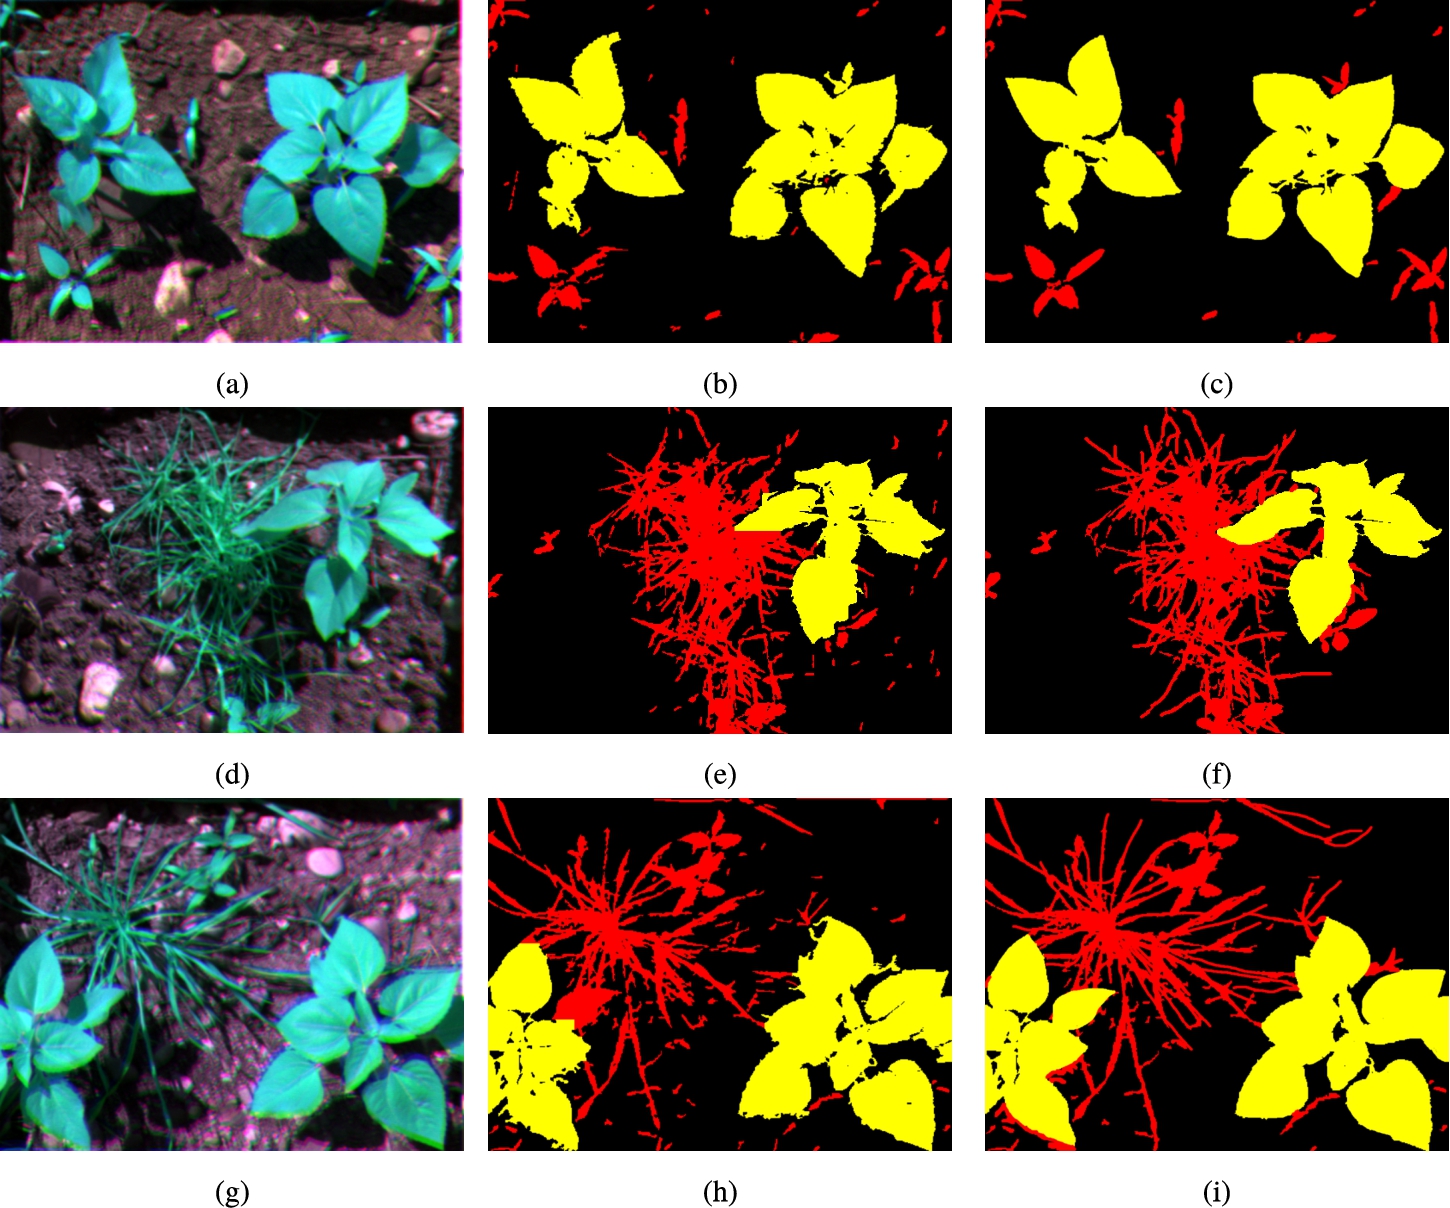 Three sample images (34, 25 and 15) segmented by the proposed classical algorithm (one per row). (a), (d) and (g) show a RGB representation of the multi-spectral image using RED, NIR and GRE bands; (b), (e) and (h) show the output of the algorithm; and (c), (f) and (i) show the ground truth determined by humans.